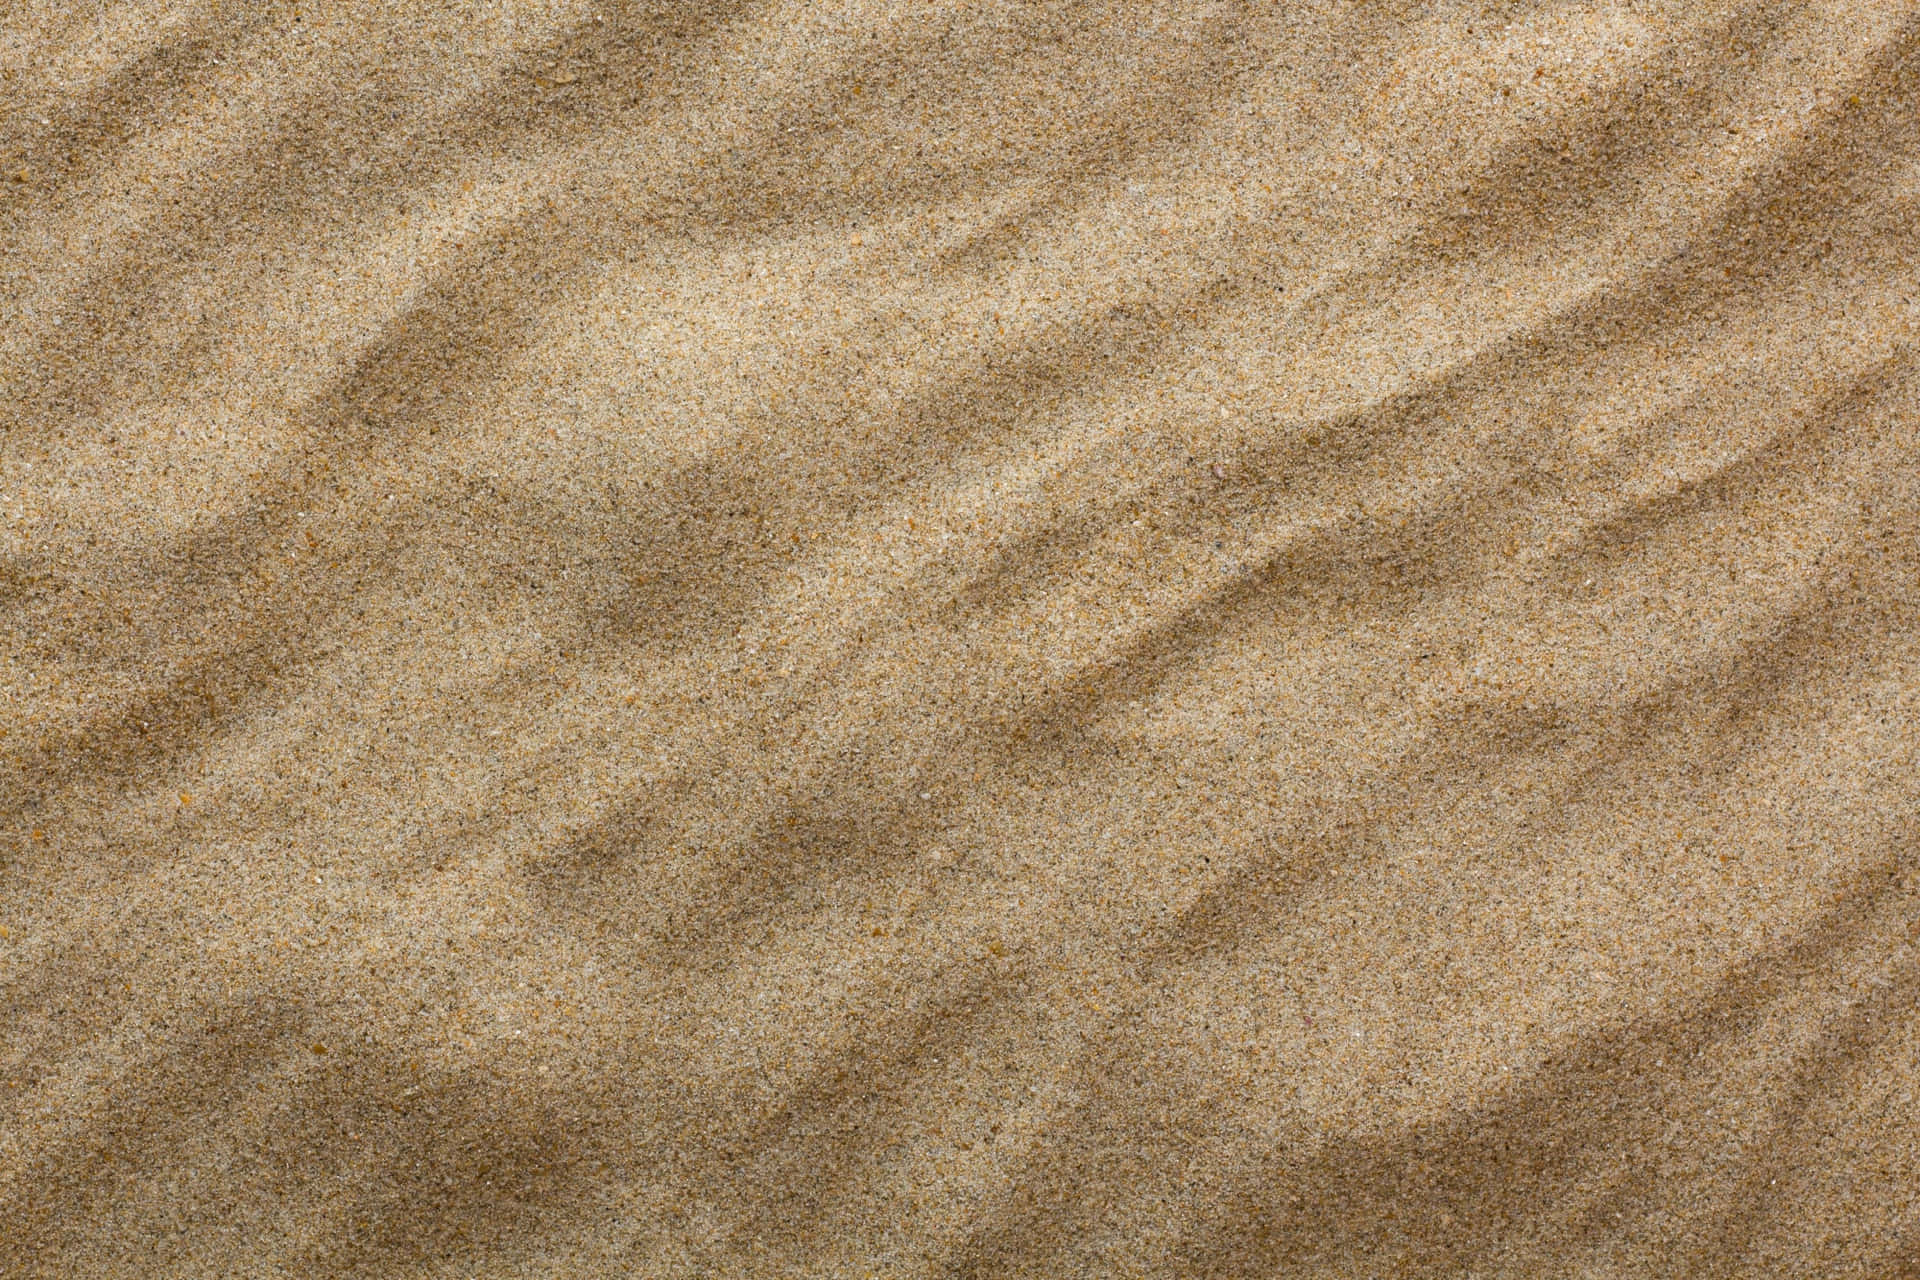 Top View Of Sand Wallpaper